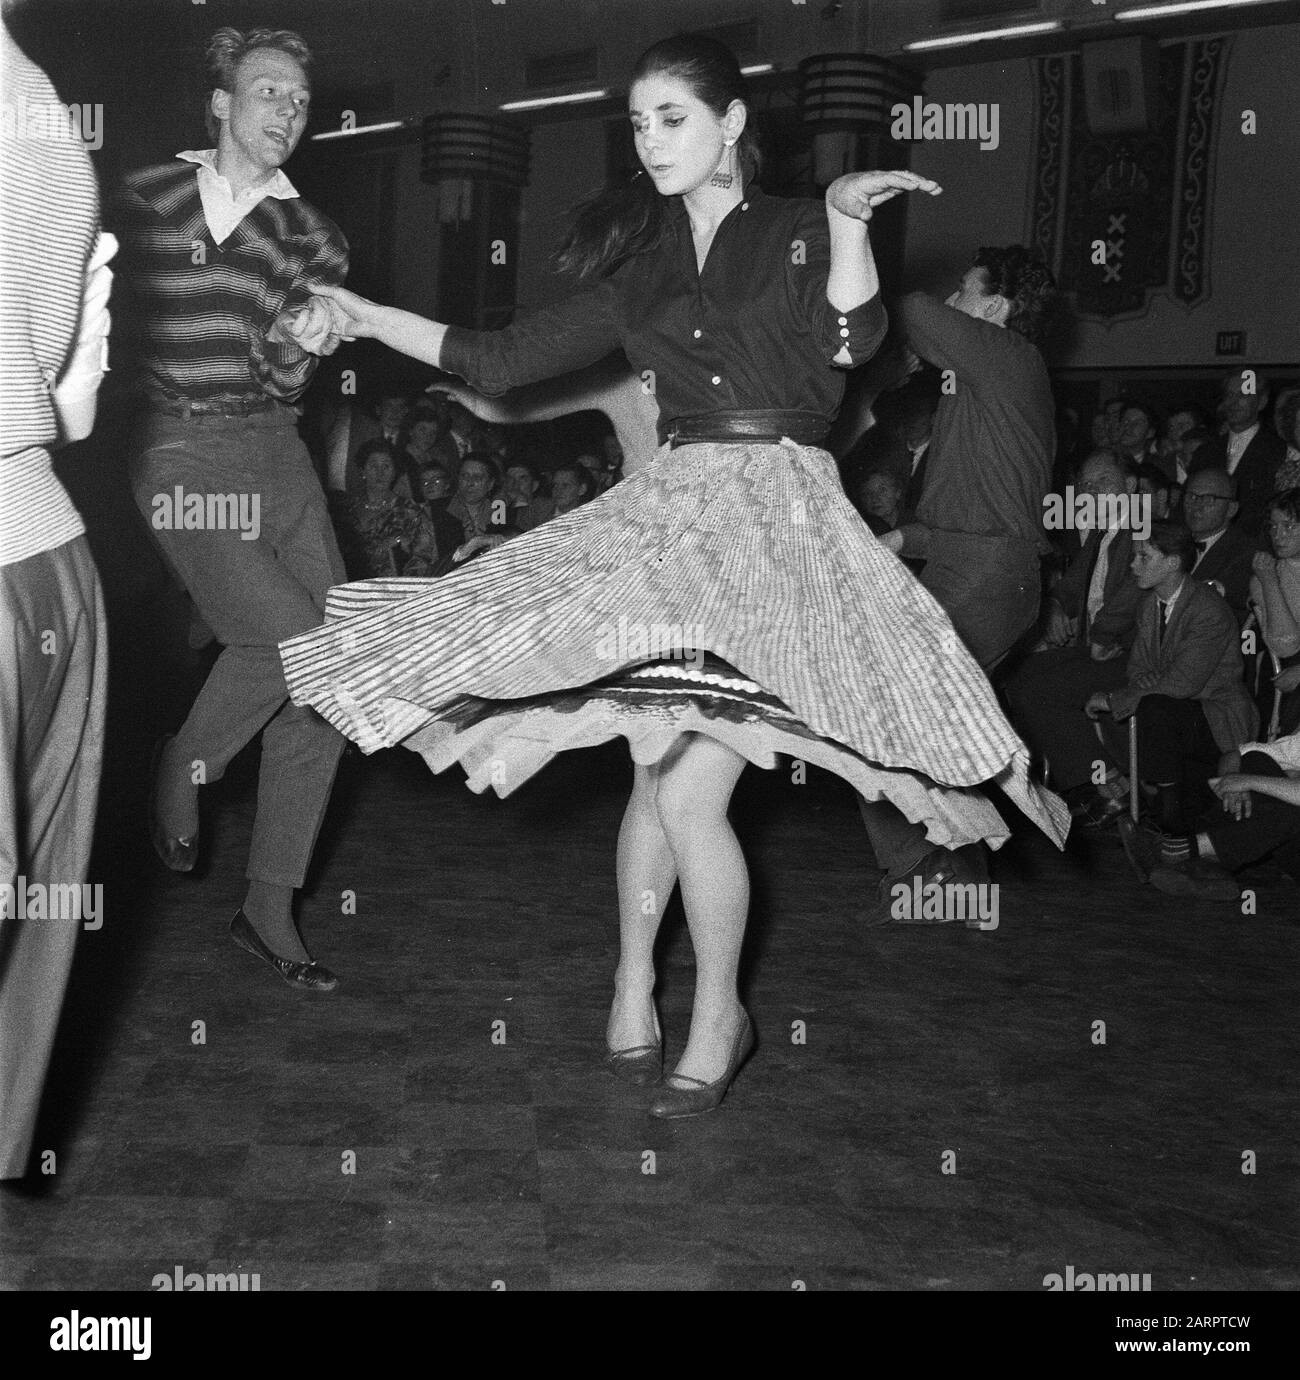 Rock-'n-roll dance contest in Krasnapolsky Amsterdam Date: February 3, 1957  Location: Amsterdam, Noord-Holland Keywords: dances, music, competitions  Institution name: Krasnapolsky : Behrens, Herbert/Anefo Stock Photo - Alamy